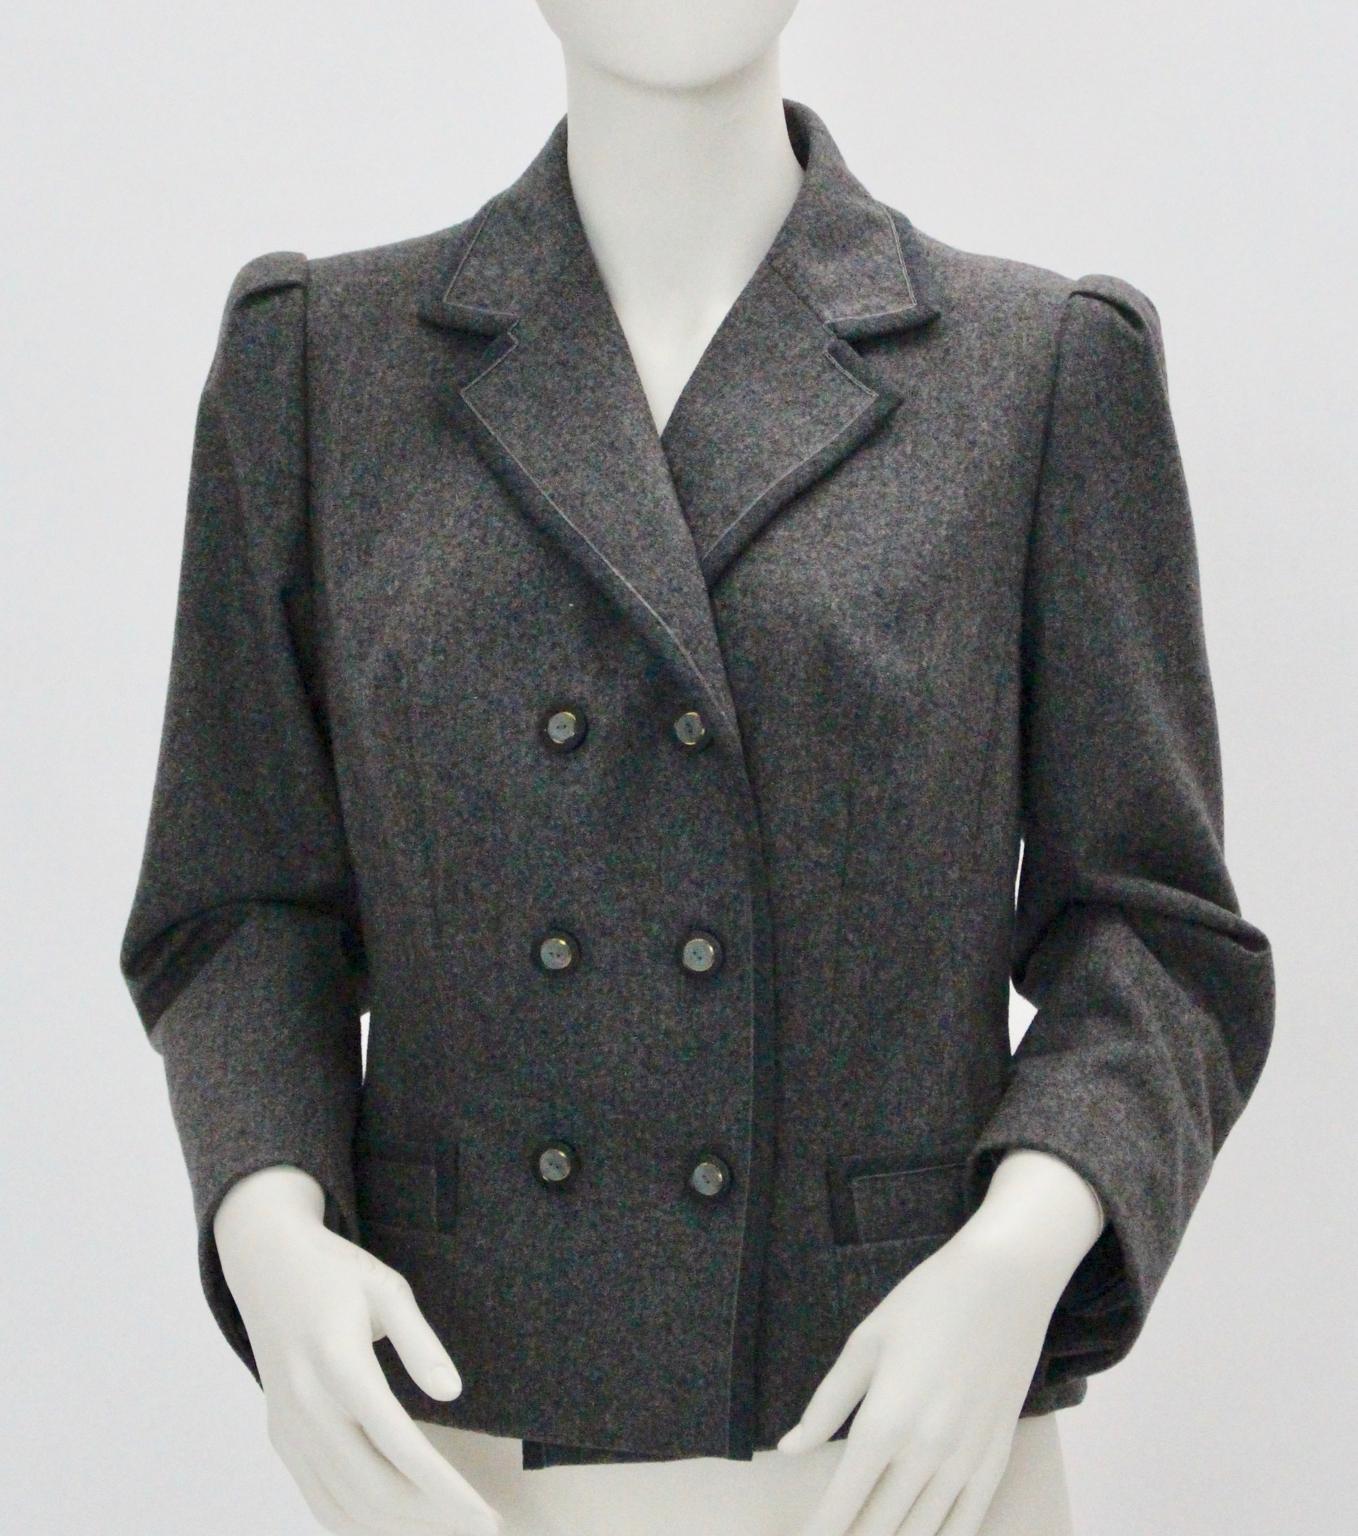 Grey woolen straight cut double-breasted Jacket with 6 buttons closure and two side pockets.
A dark-grey piping is running along the hem.
The ruffles at the shoulders are a nice feminine detail and give this jacket a 1940s touch.
Labelled inside: W.